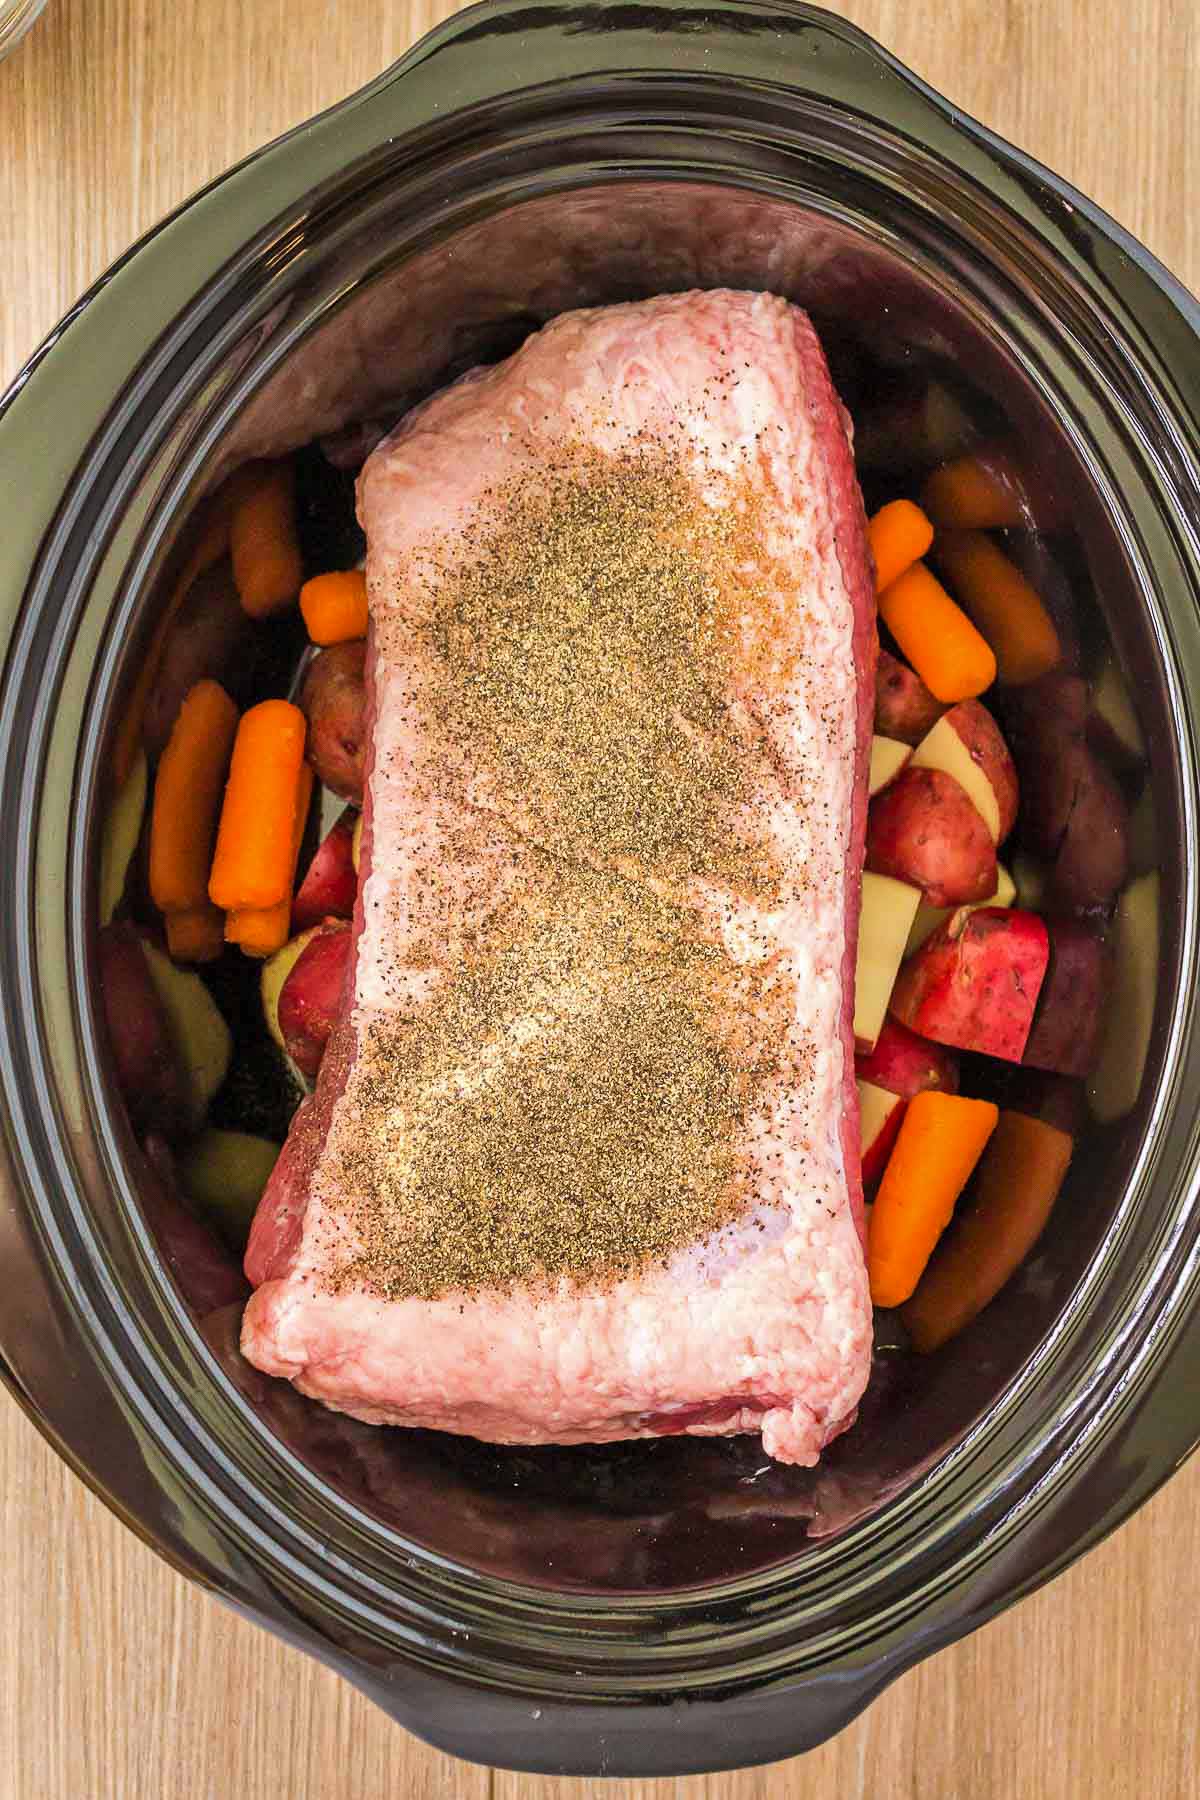 Raw corned beef brisket shown in a crock pot with carrots, potatoes, and seasoning.